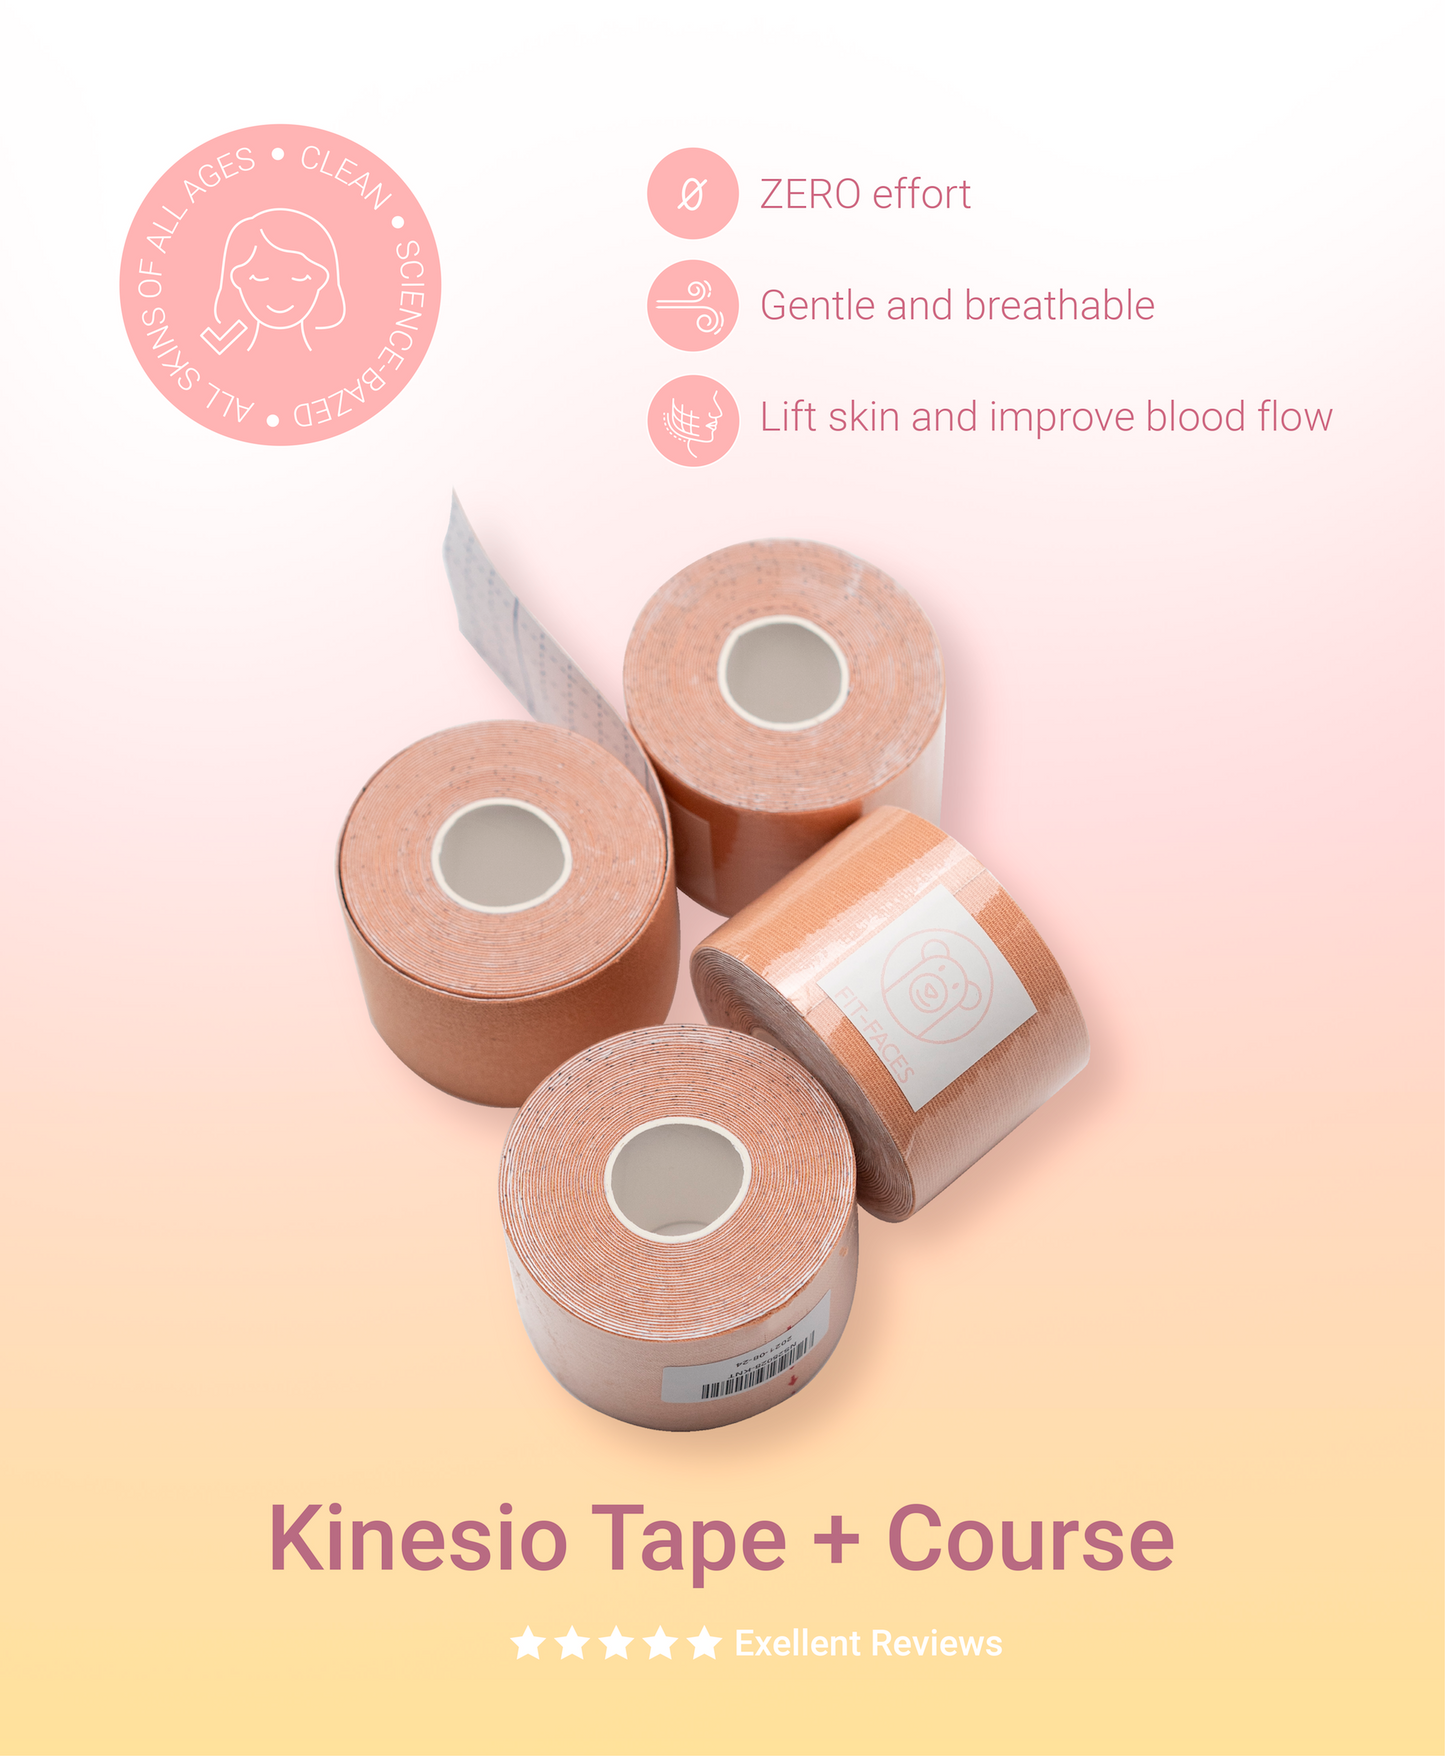 FIT-FACES FACIAL KINESIO TAPE + COURSE